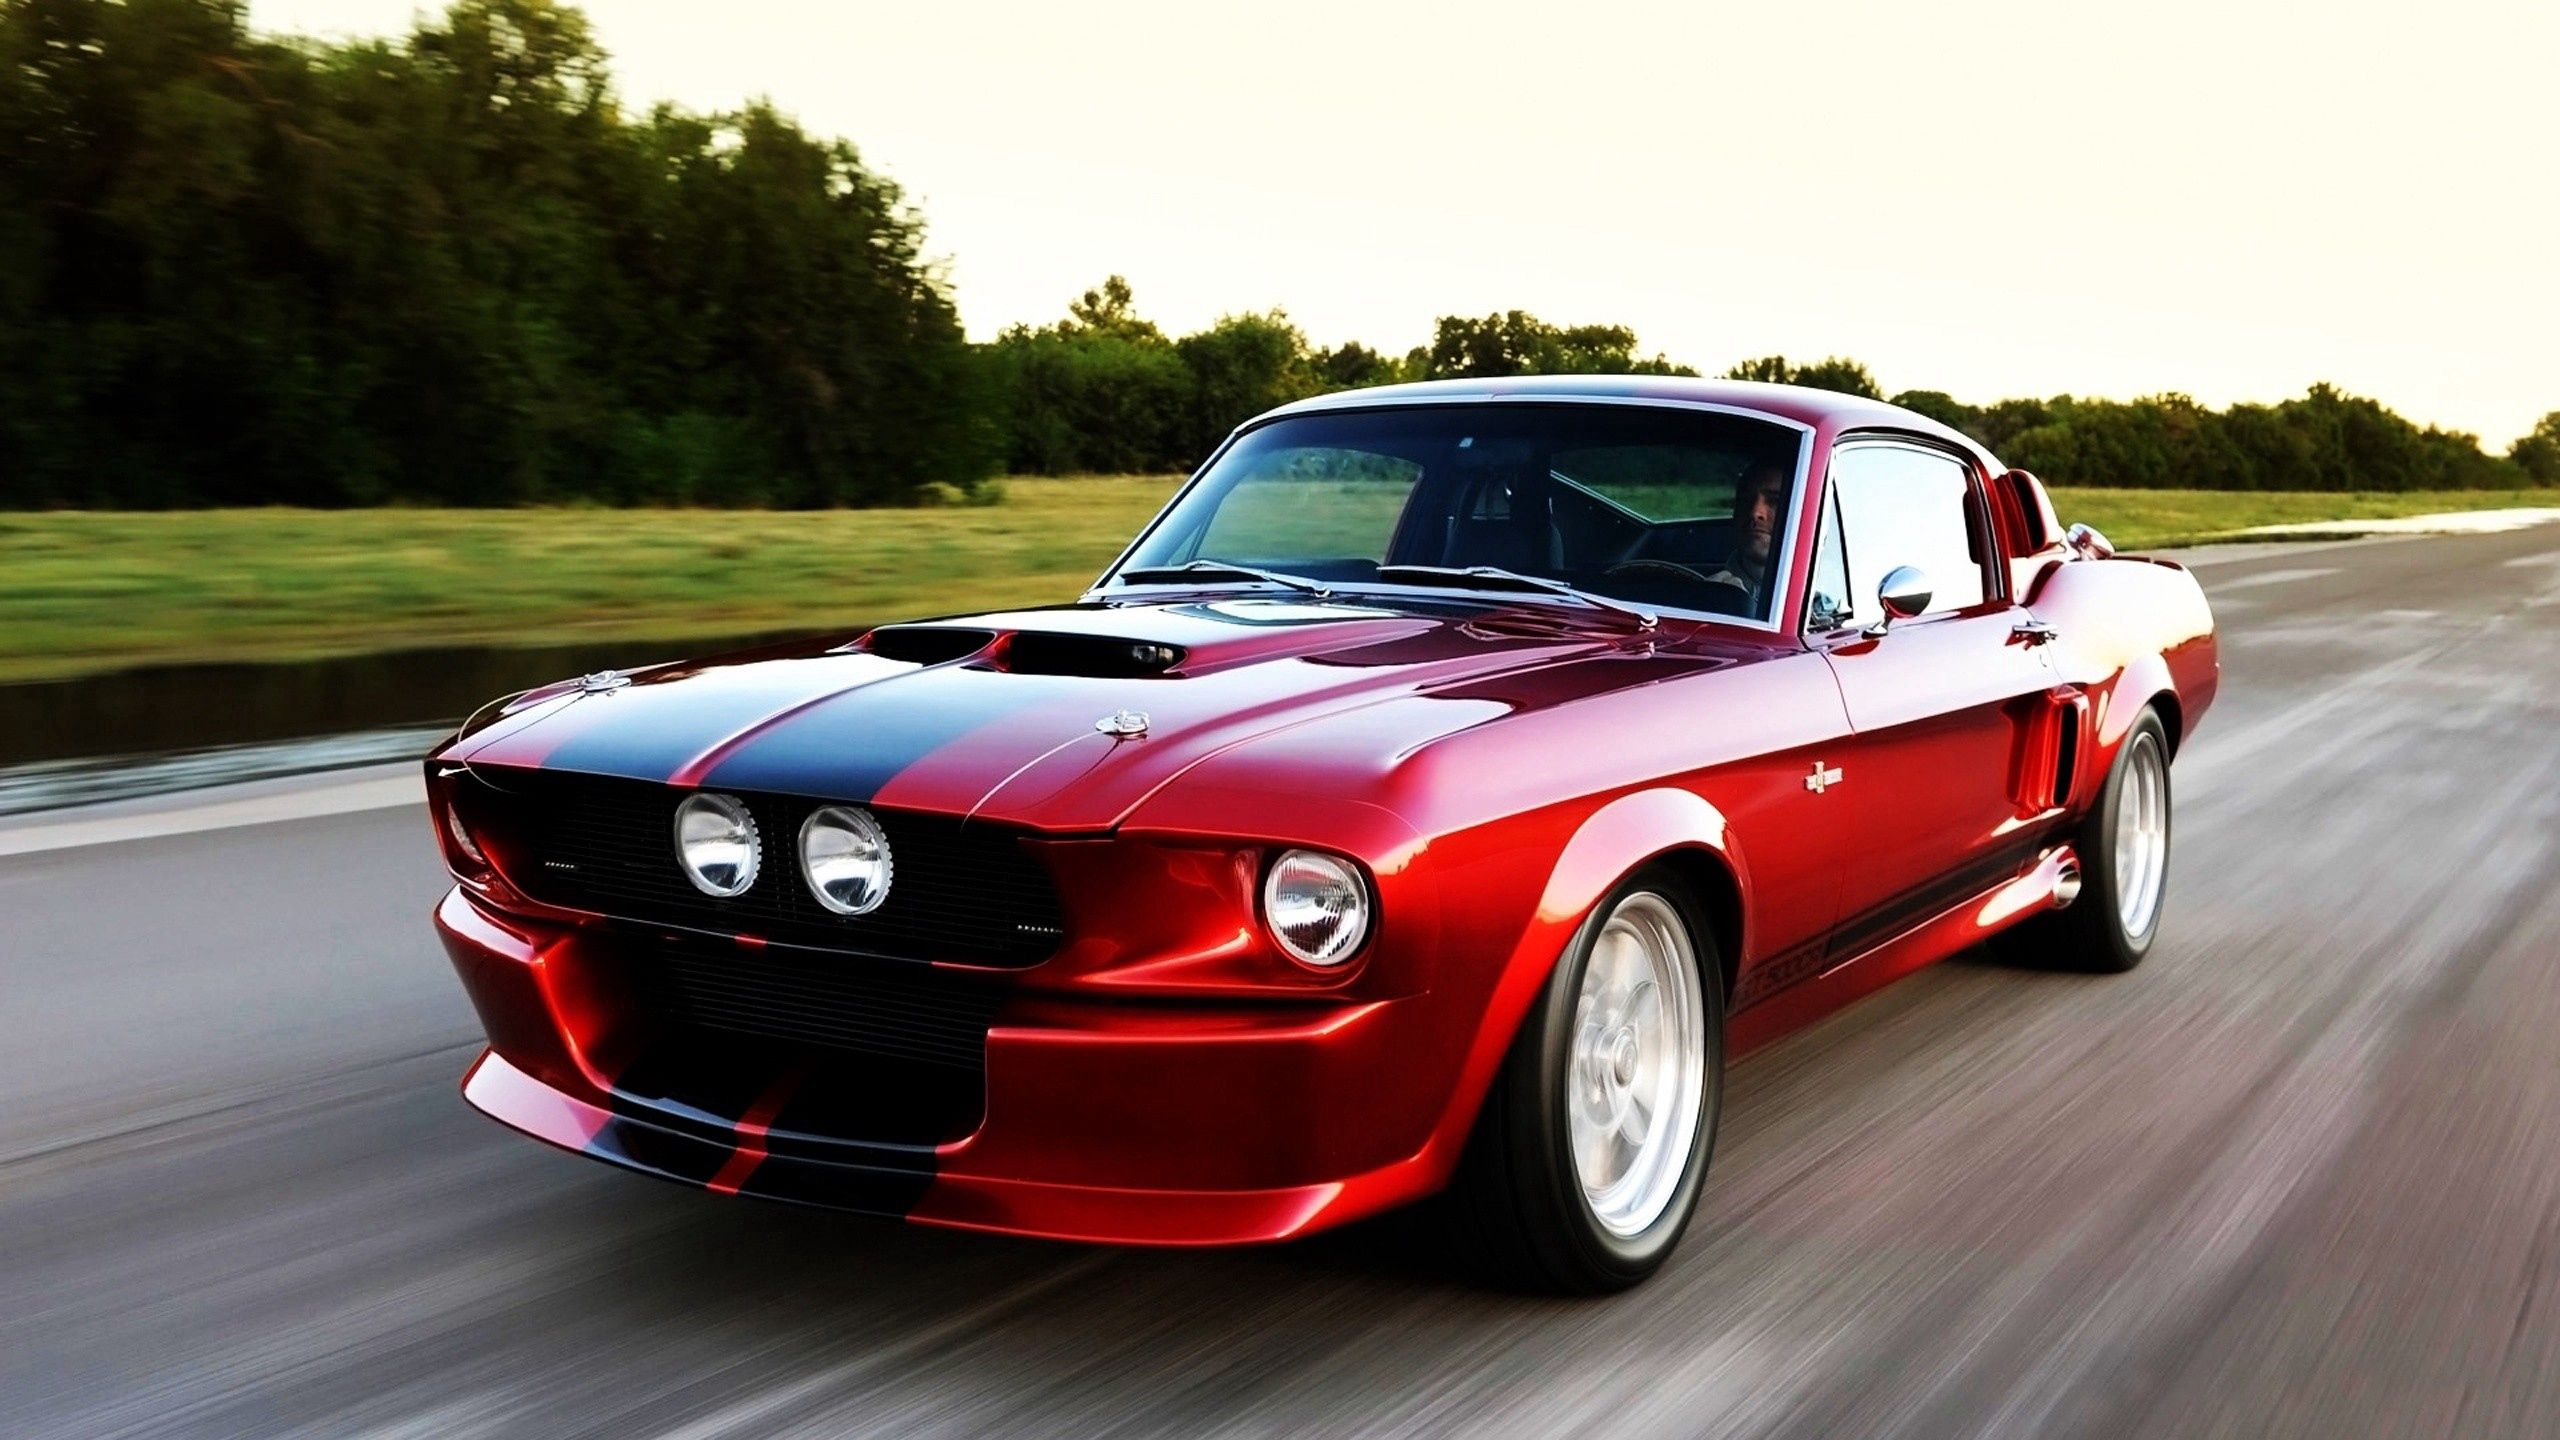 ford, cars, ford mustang, red car wallpaper for mobile